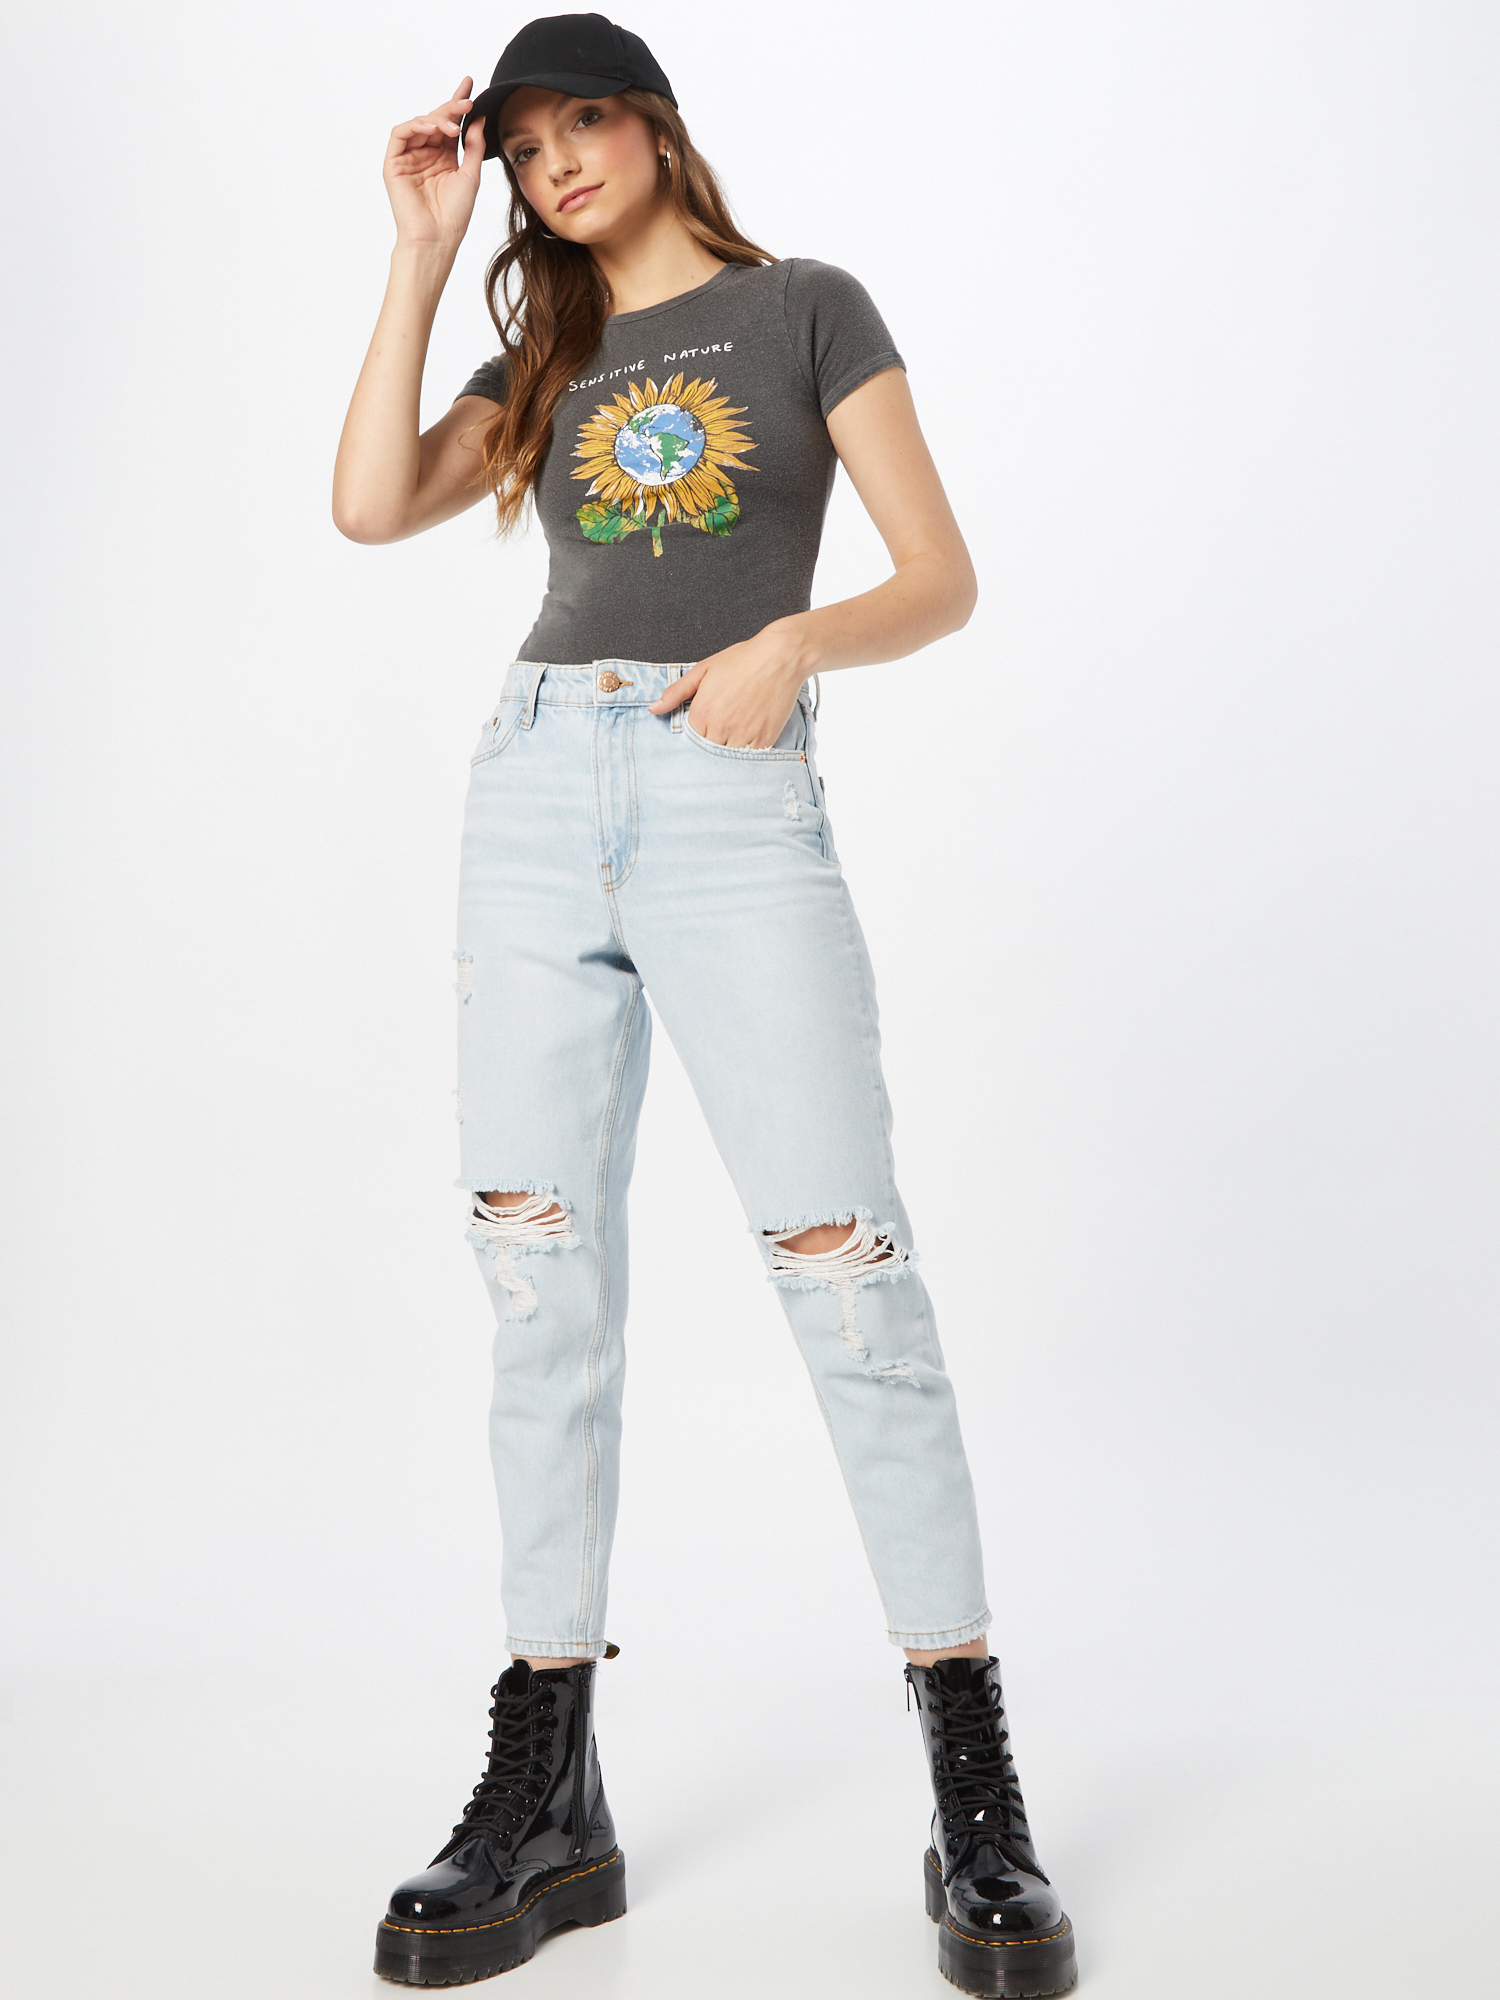 BDG Urban Outfitters T-Shirt SENSITIVE NATURE BABY in Dunkelgrau 